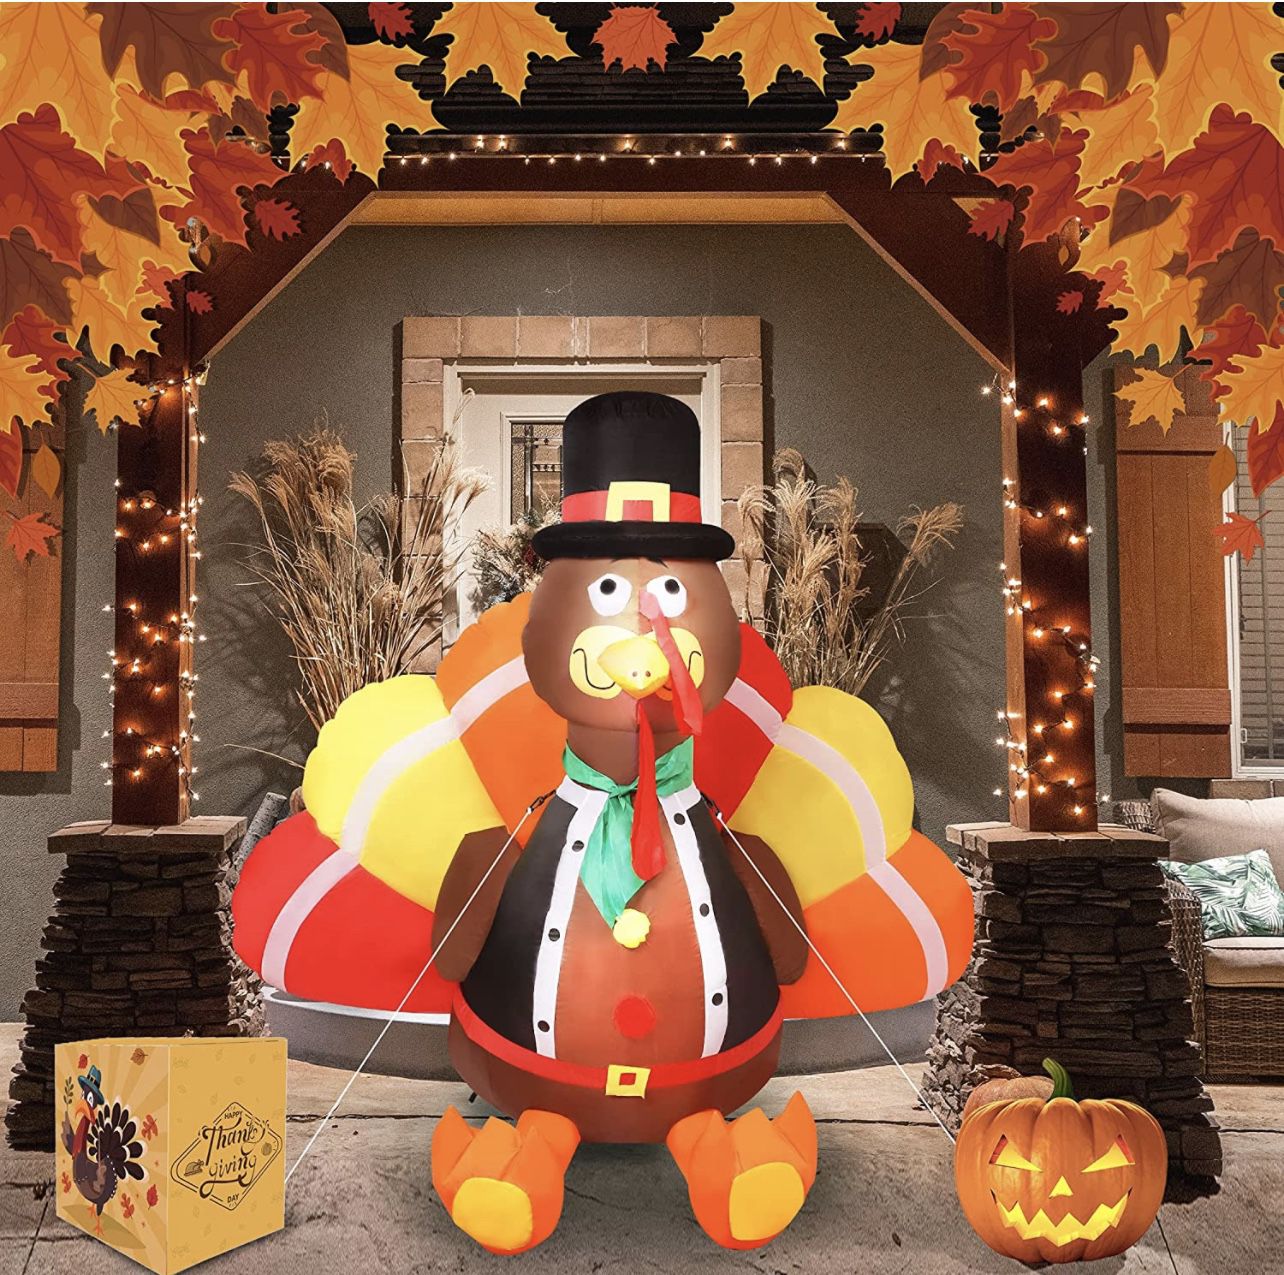 Thanksgiving Inflatable Decorations 6 Foot Upgraded Blow Up Turkey with Huge Color Tail, Pilgrim Hat